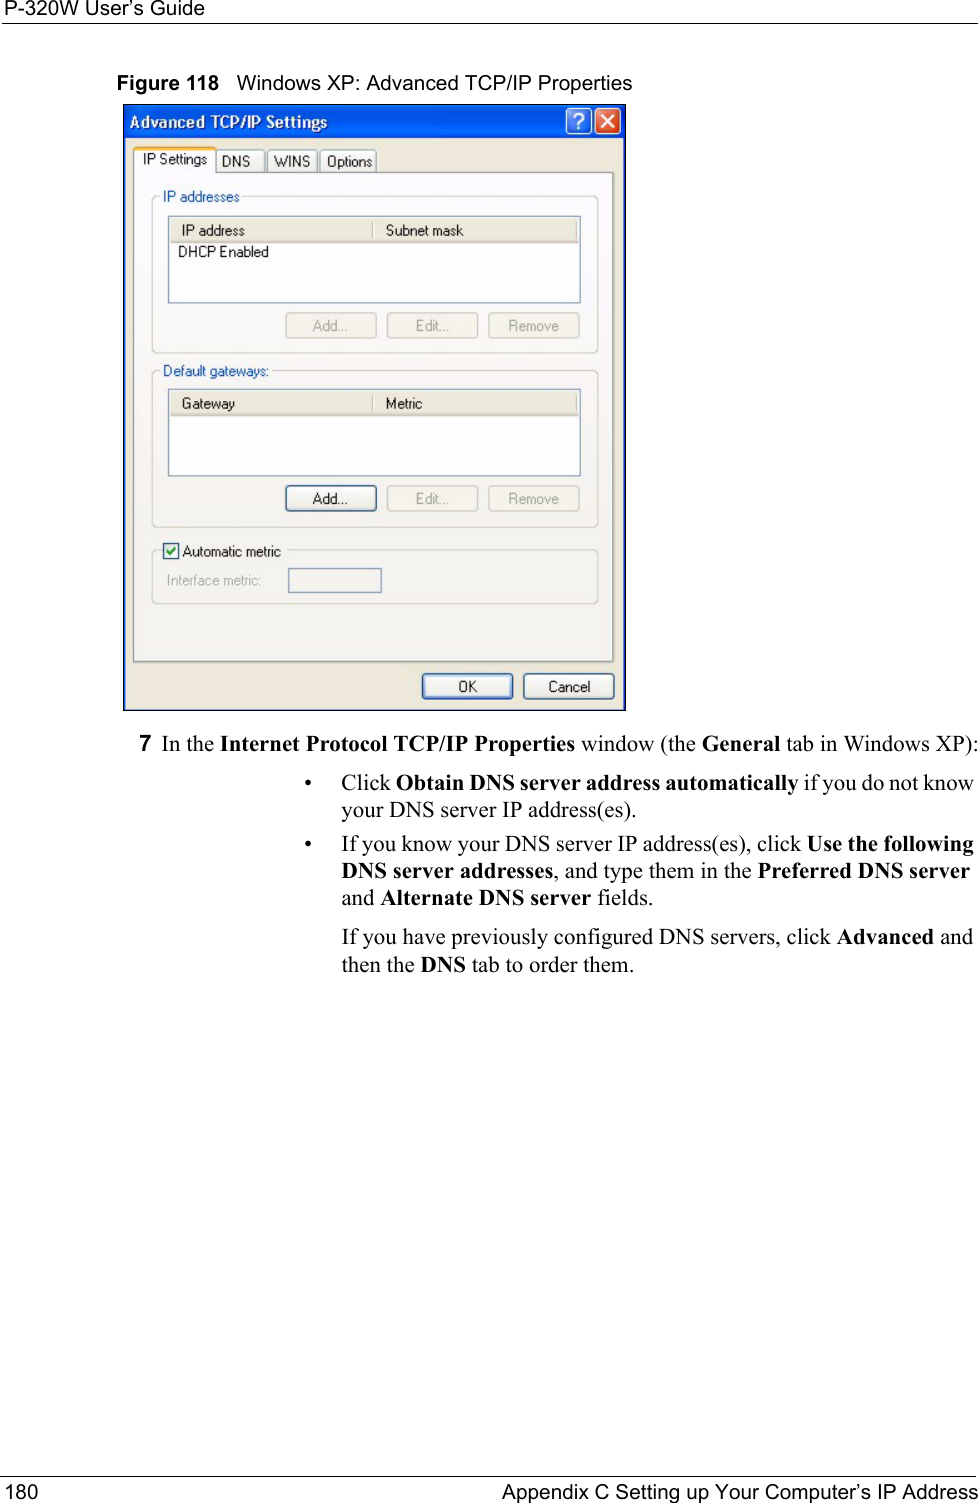 P-320W User’s Guide180  Appendix C Setting up Your Computer’s IP AddressFigure 118   Windows XP: Advanced TCP/IP Properties7In the Internet Protocol TCP/IP Properties window (the General tab in Windows XP):• Click Obtain DNS server address automatically if you do not know your DNS server IP address(es).• If you know your DNS server IP address(es), click Use the following DNS server addresses, and type them in the Preferred DNS server and Alternate DNS server fields. If you have previously configured DNS servers, click Advanced and then the DNS tab to order them.